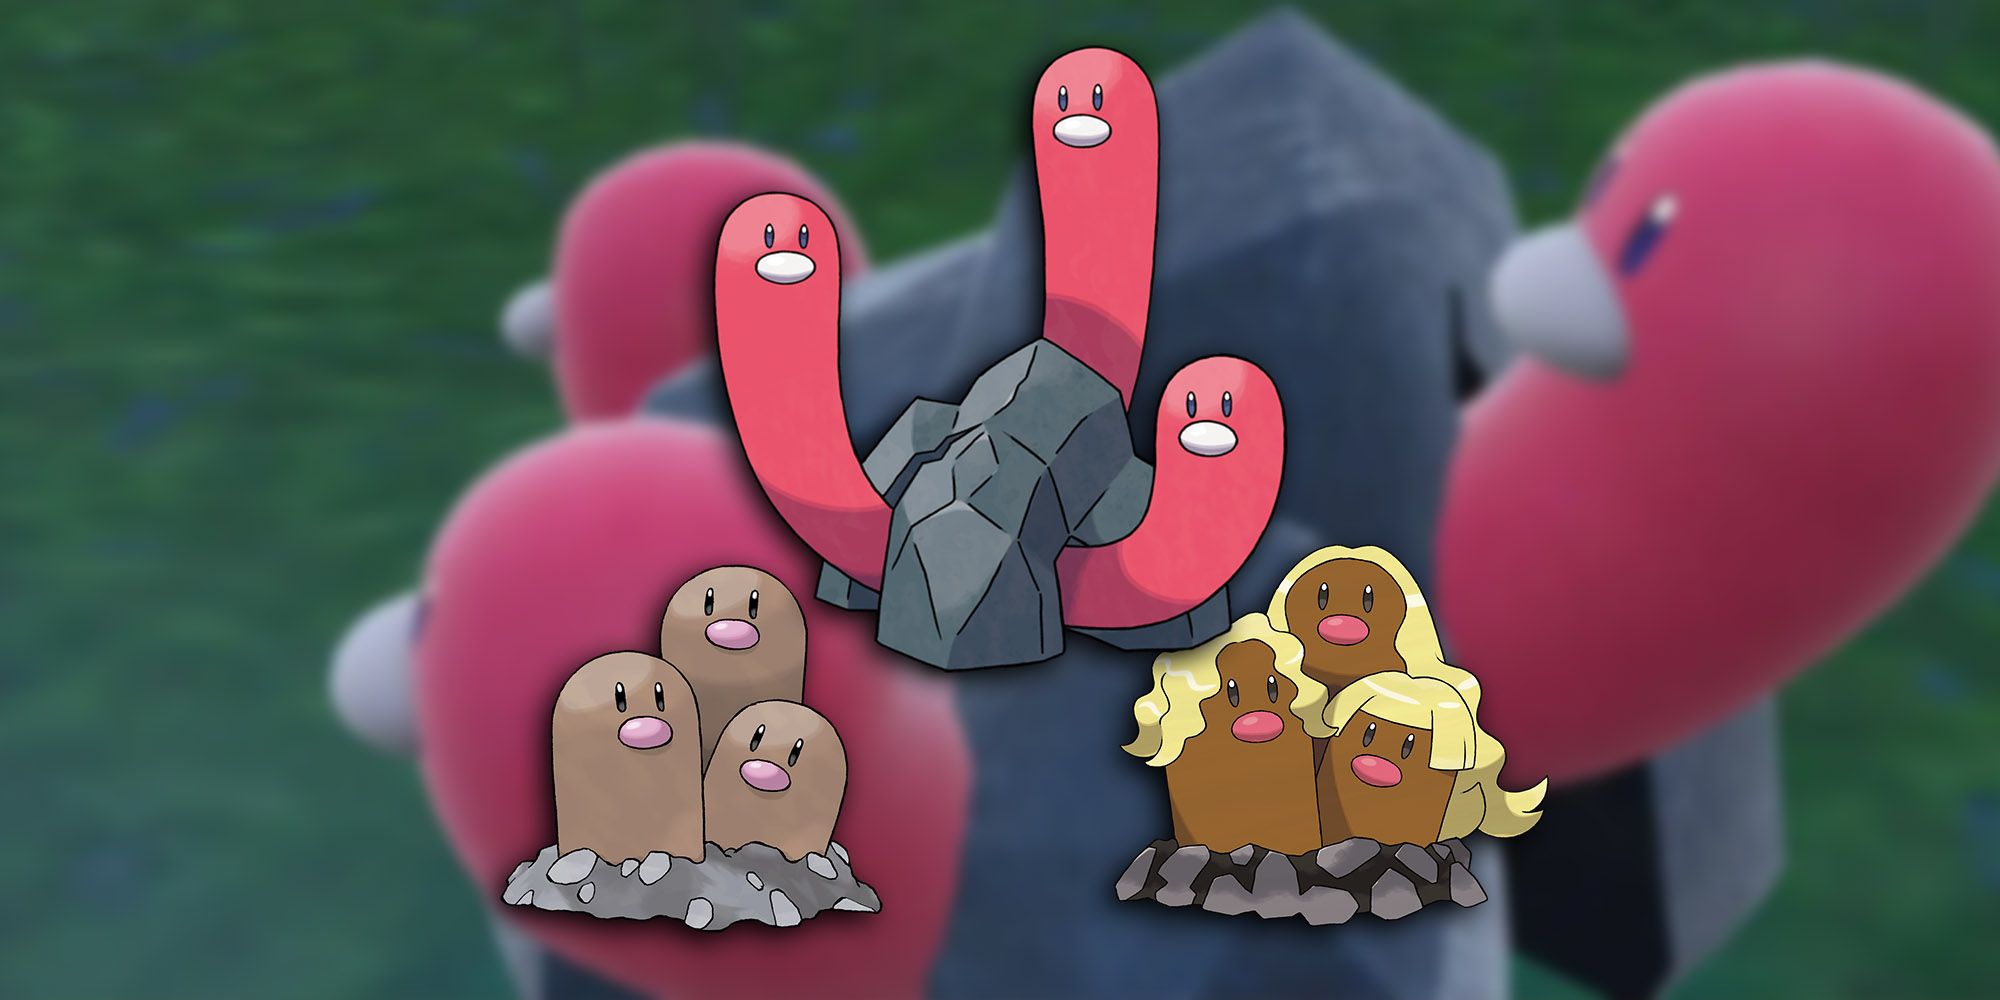 Pokemon - Wugtrio Seen In-Game With PNGs Of Dugtrio, Alolan Dugtrio, and Wugtrio On Top